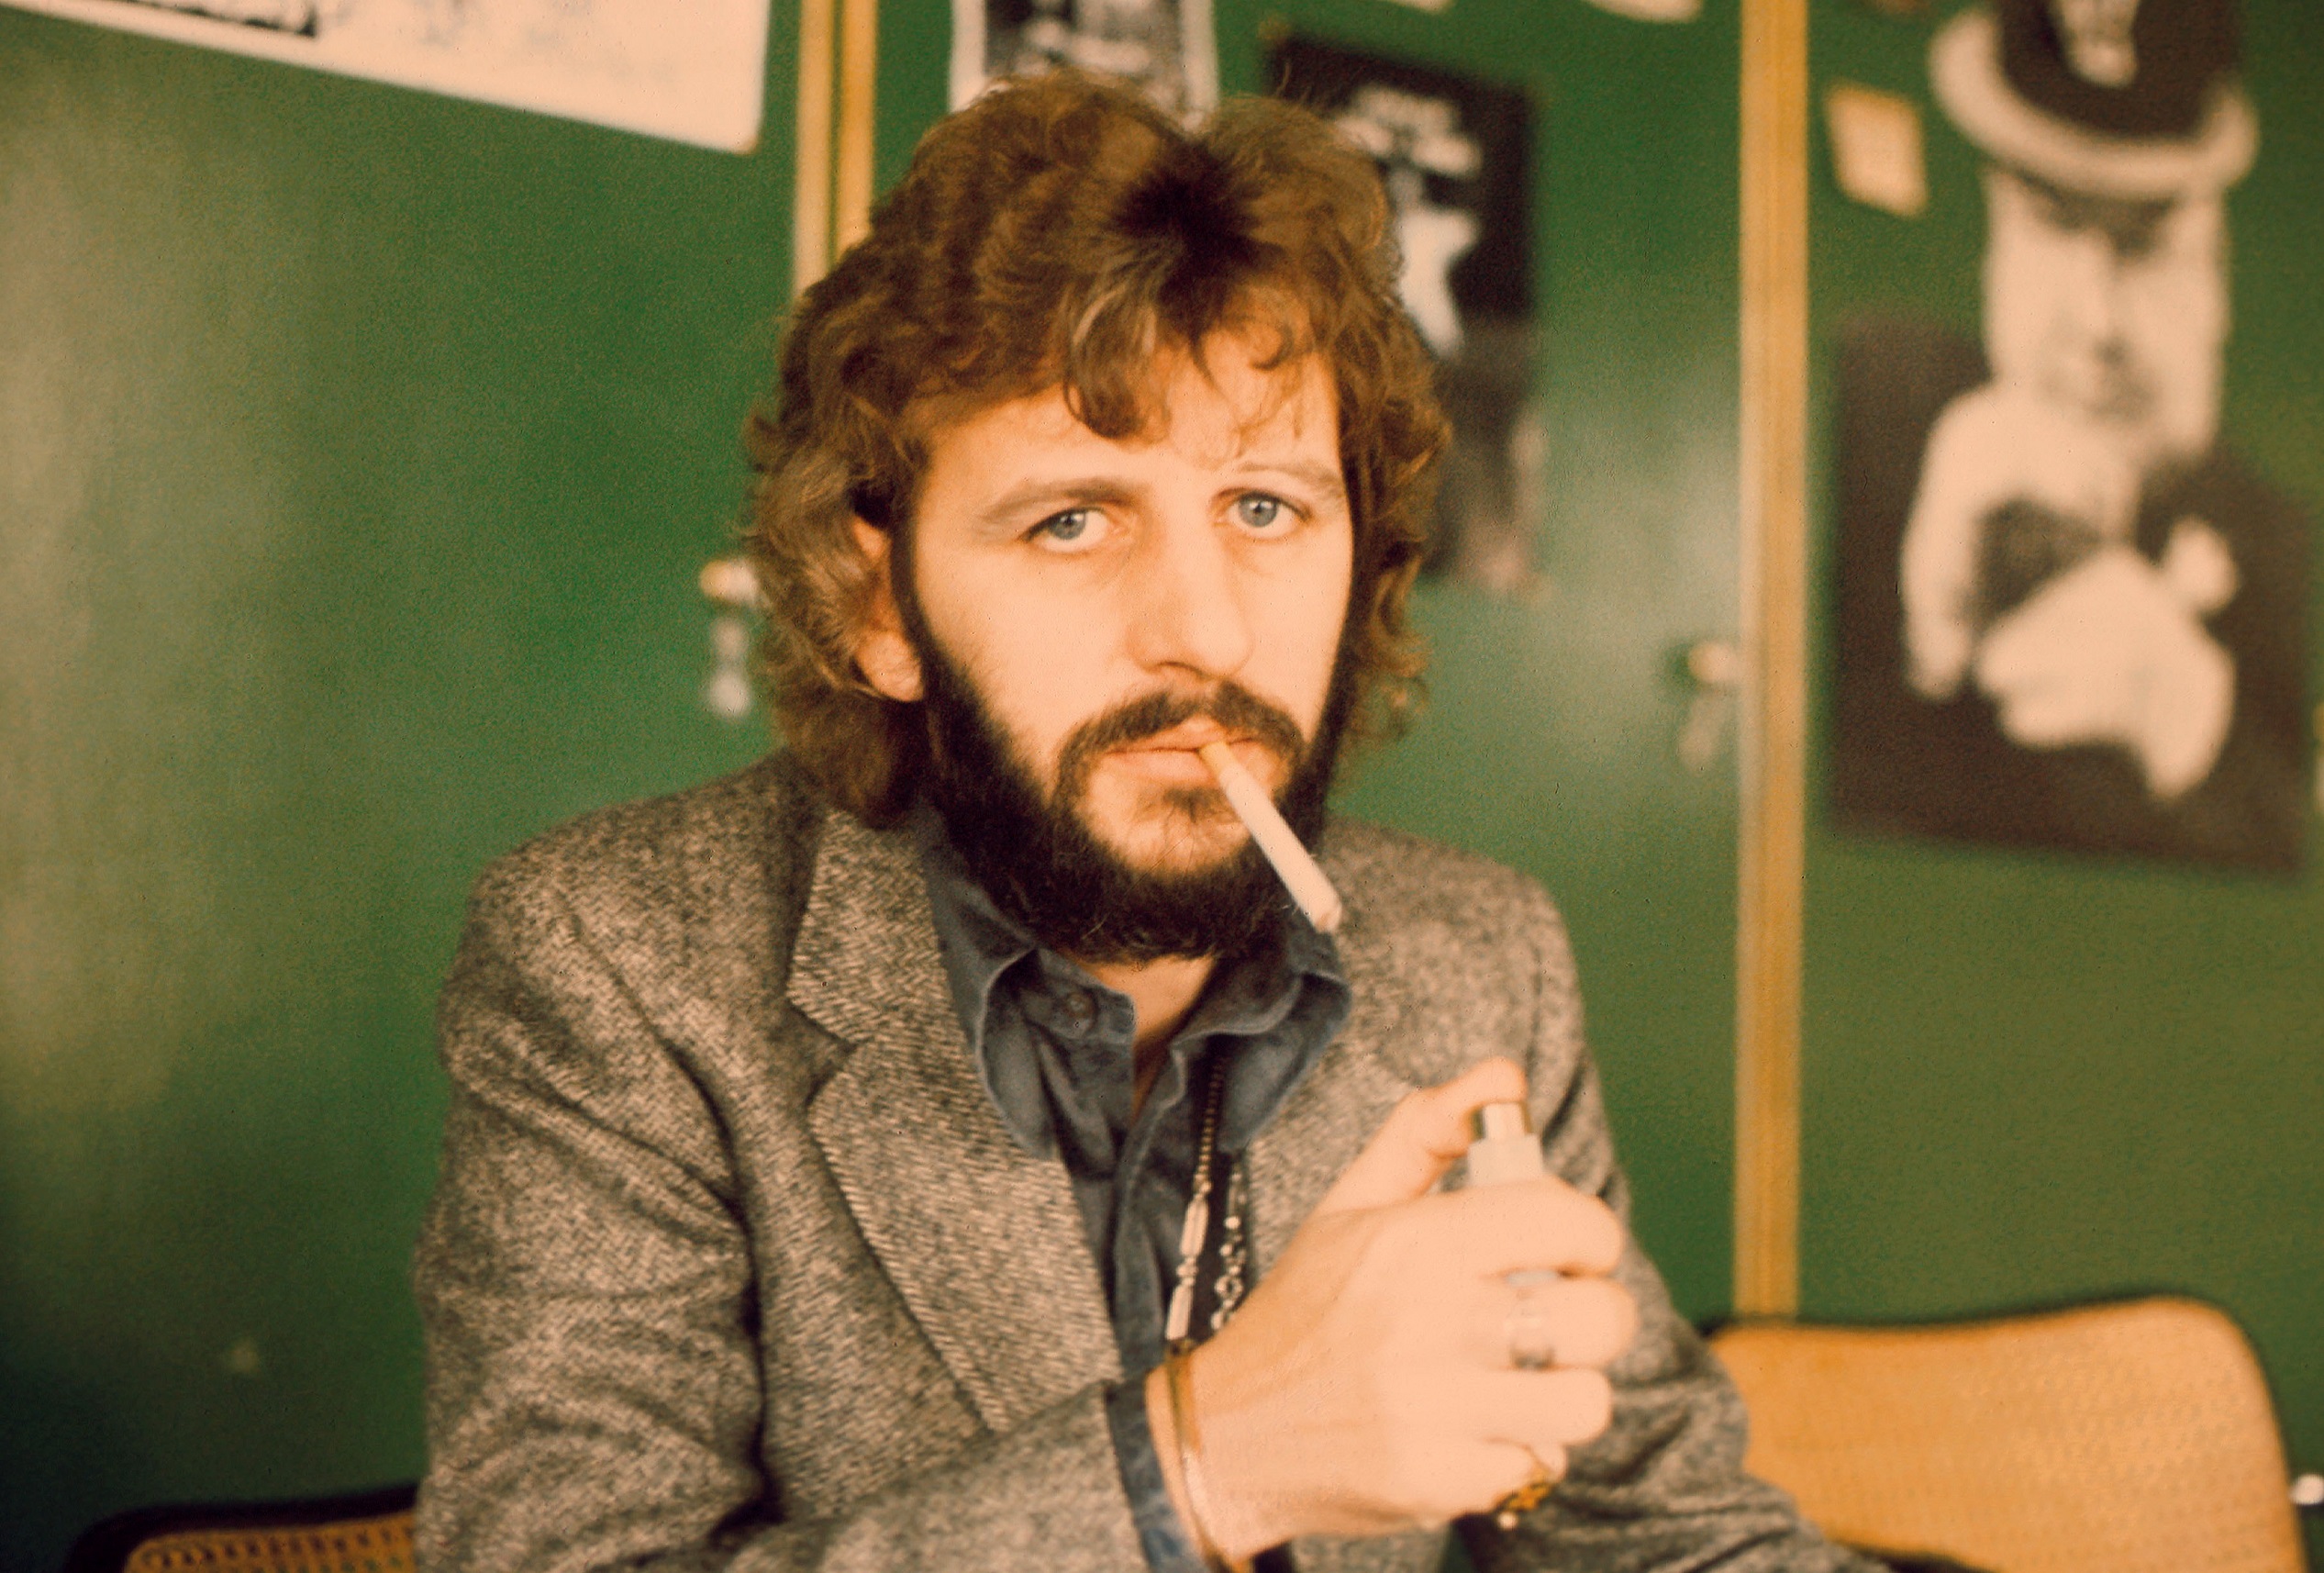 Ringo Starr of The Beatles in a jacket